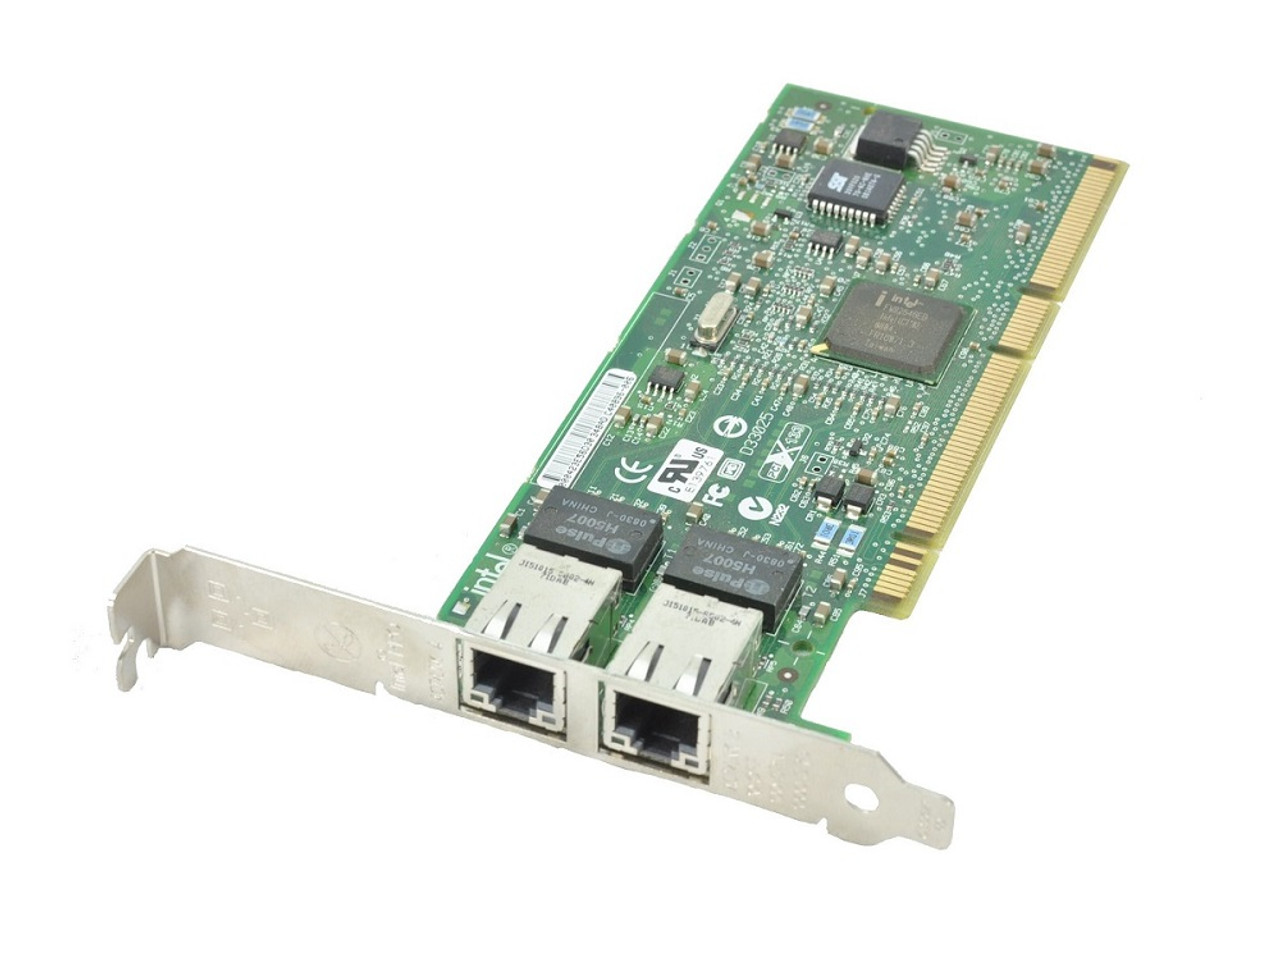 615729-B21 - HP Ethernet 1GB 4-Port 366m Adapter Network Adapter 4 Ports